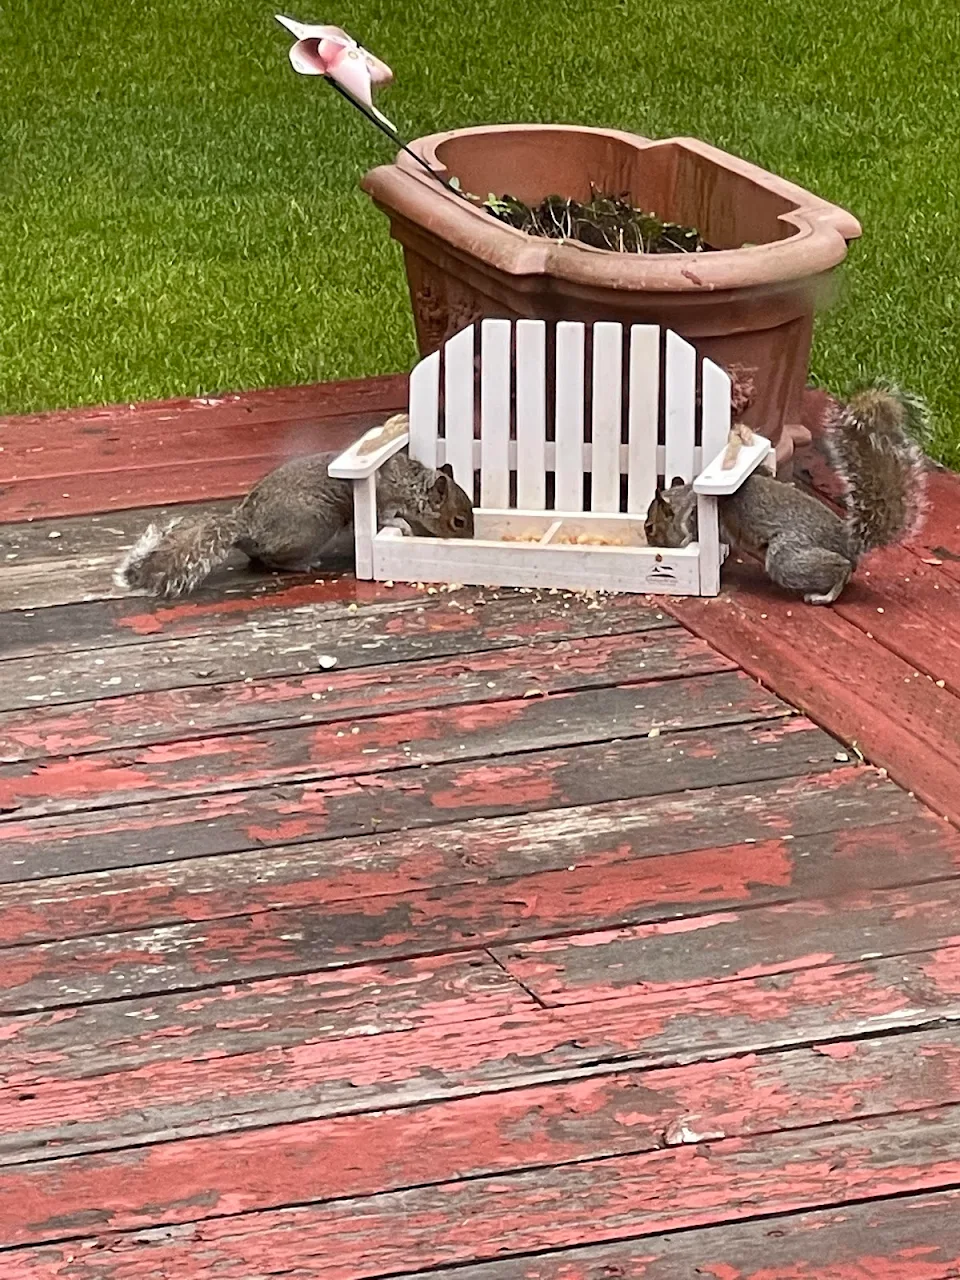 Our 2 new baby squirrels sharing their food